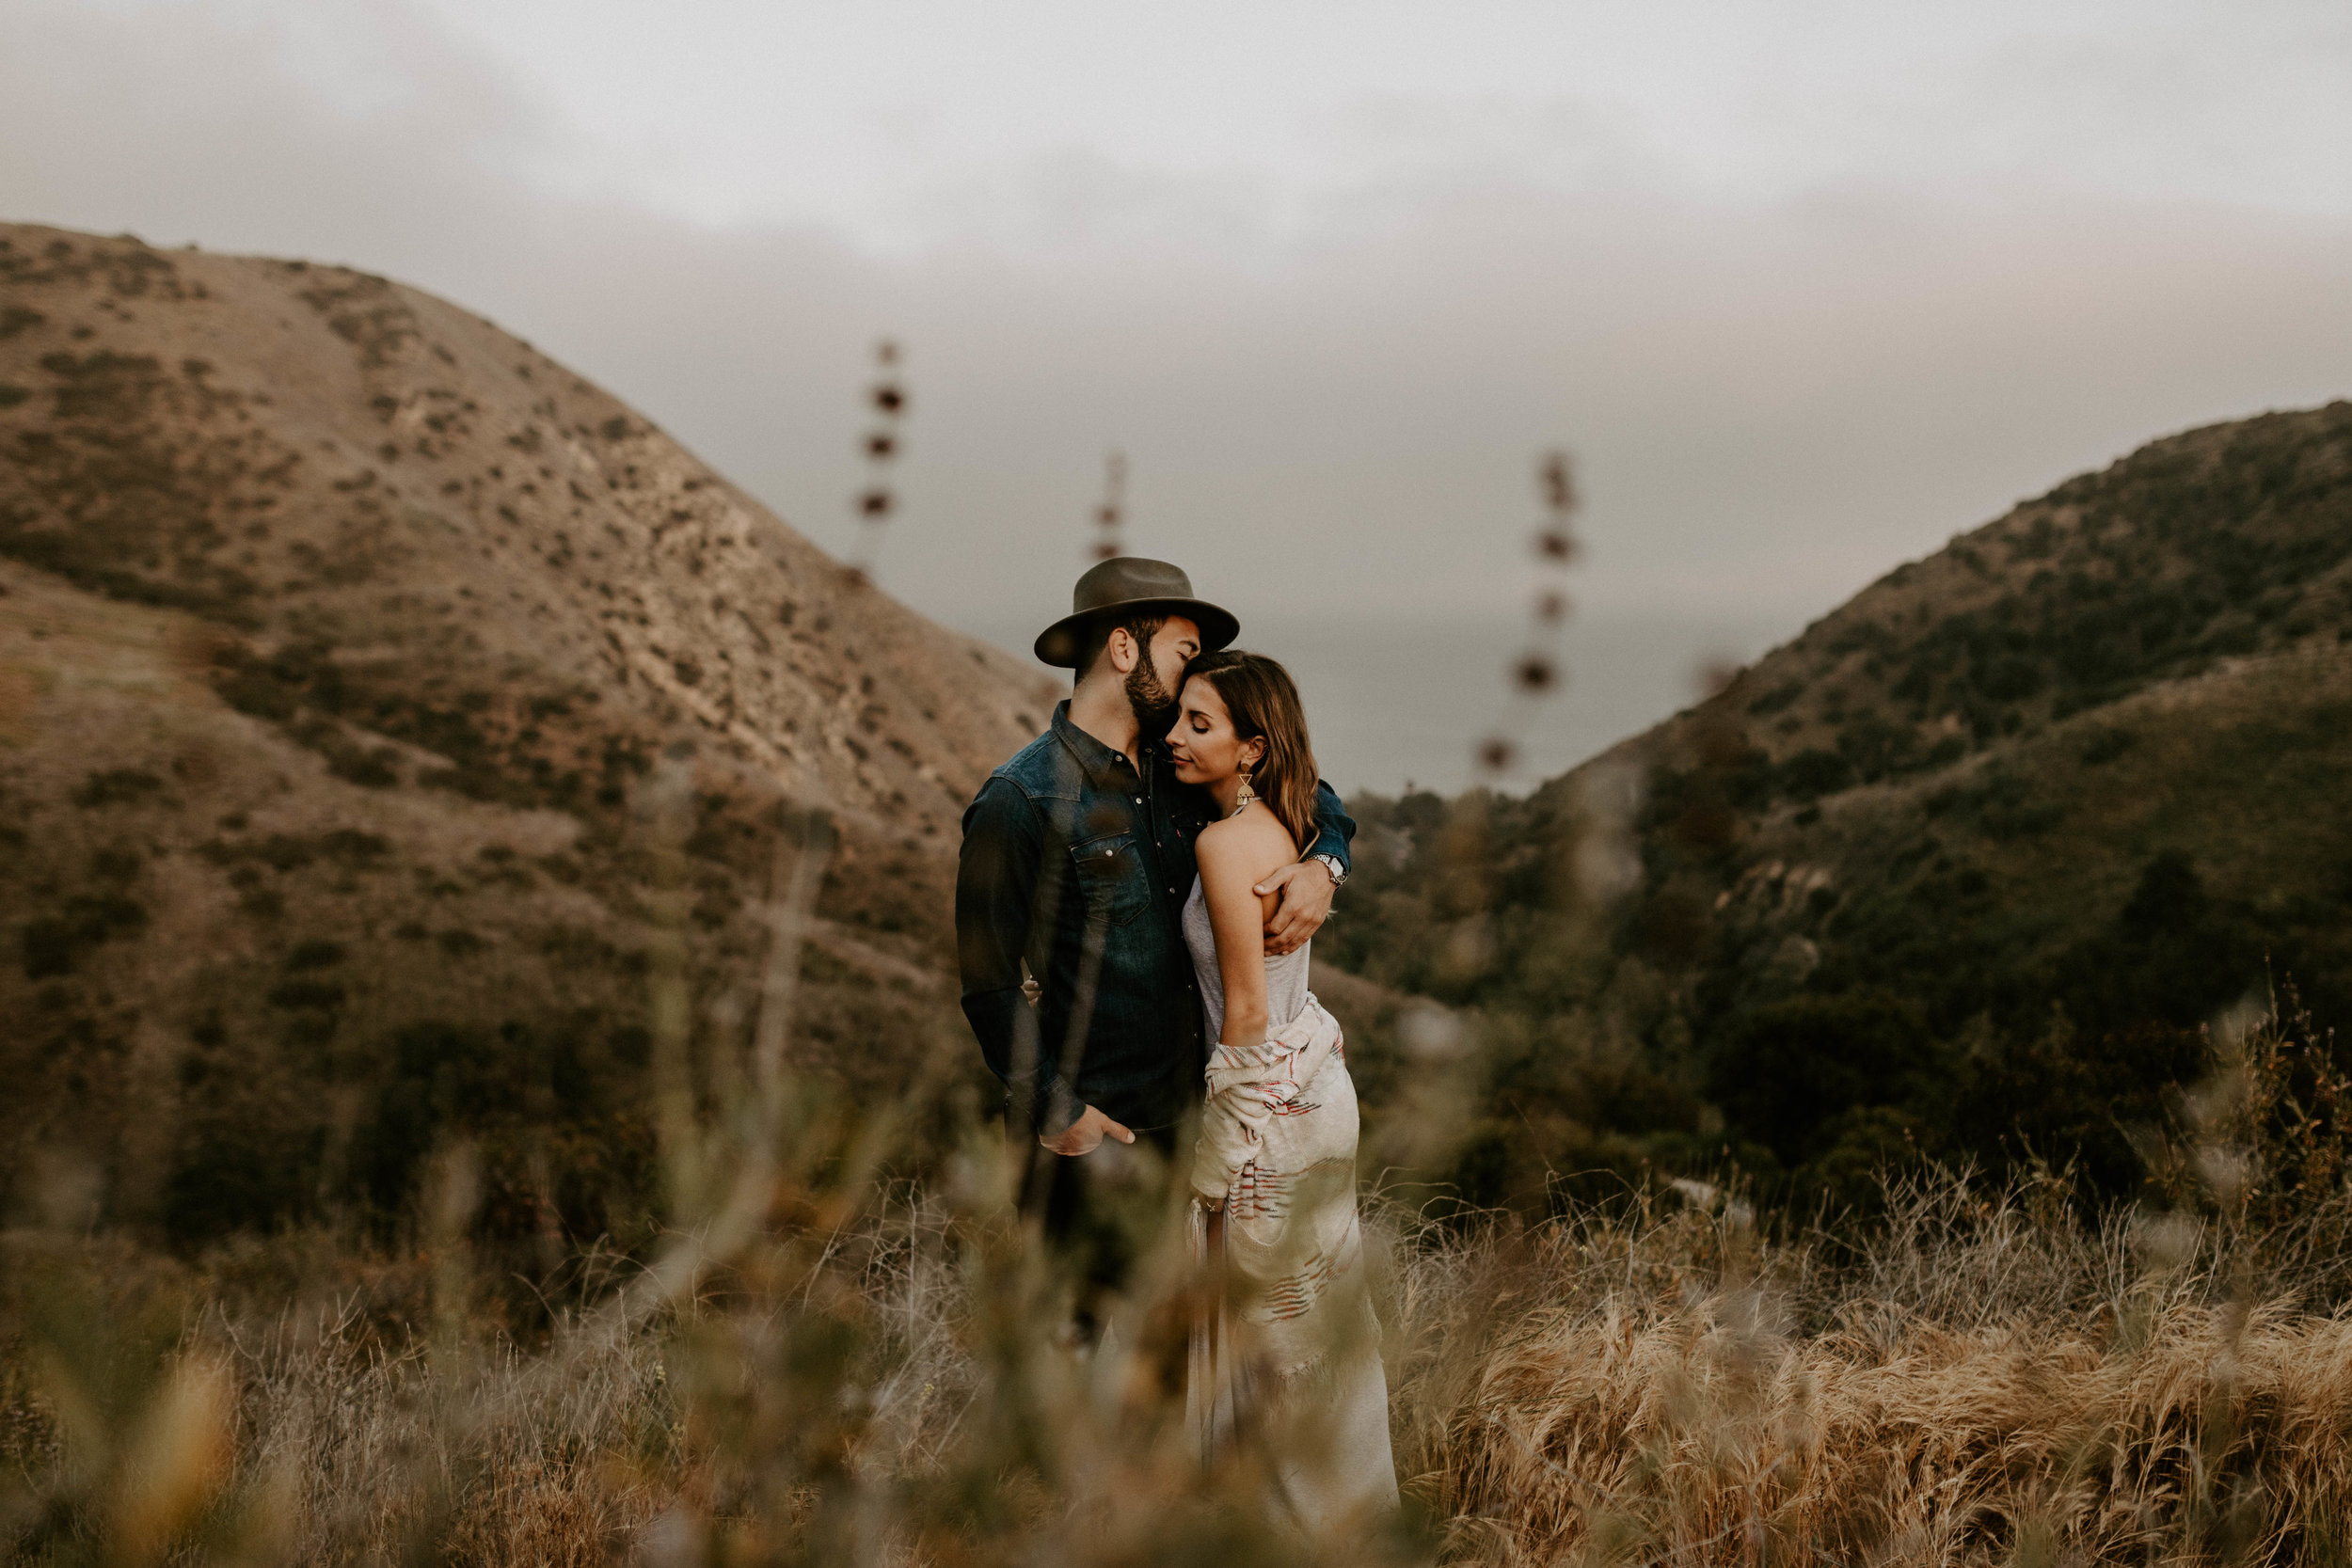 Engagement session in the Santa Monica Mountains in Malibu, CA